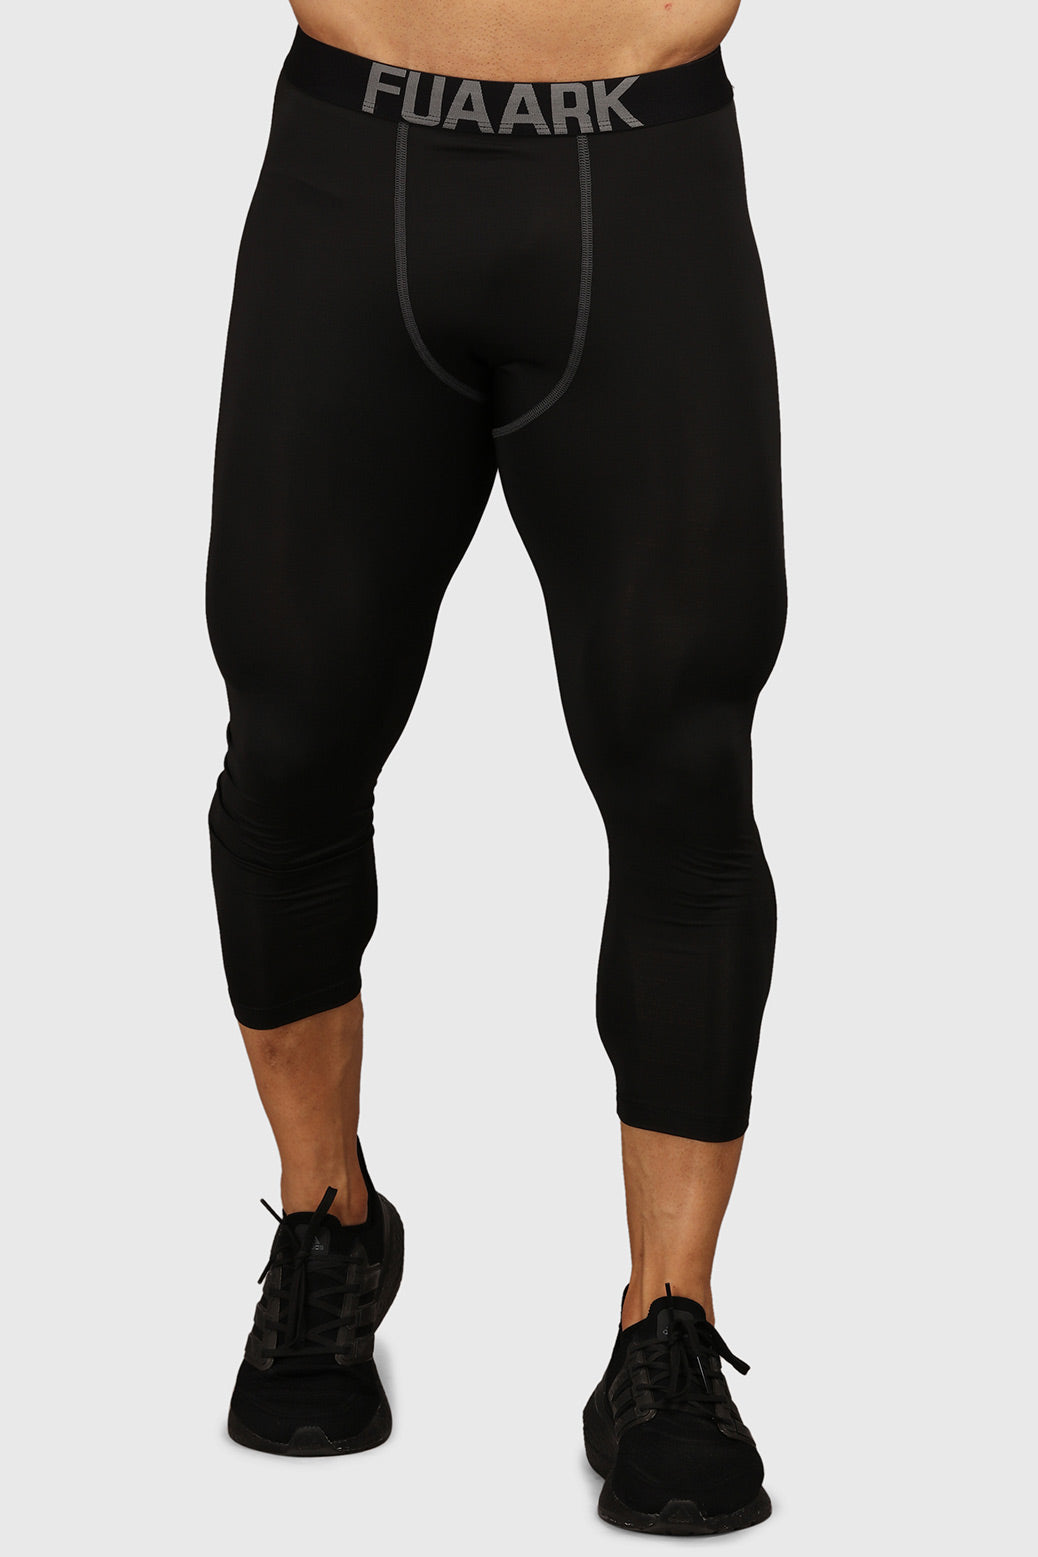 The 9 Best Compression Leggings of 2023 Tested and Reviewed